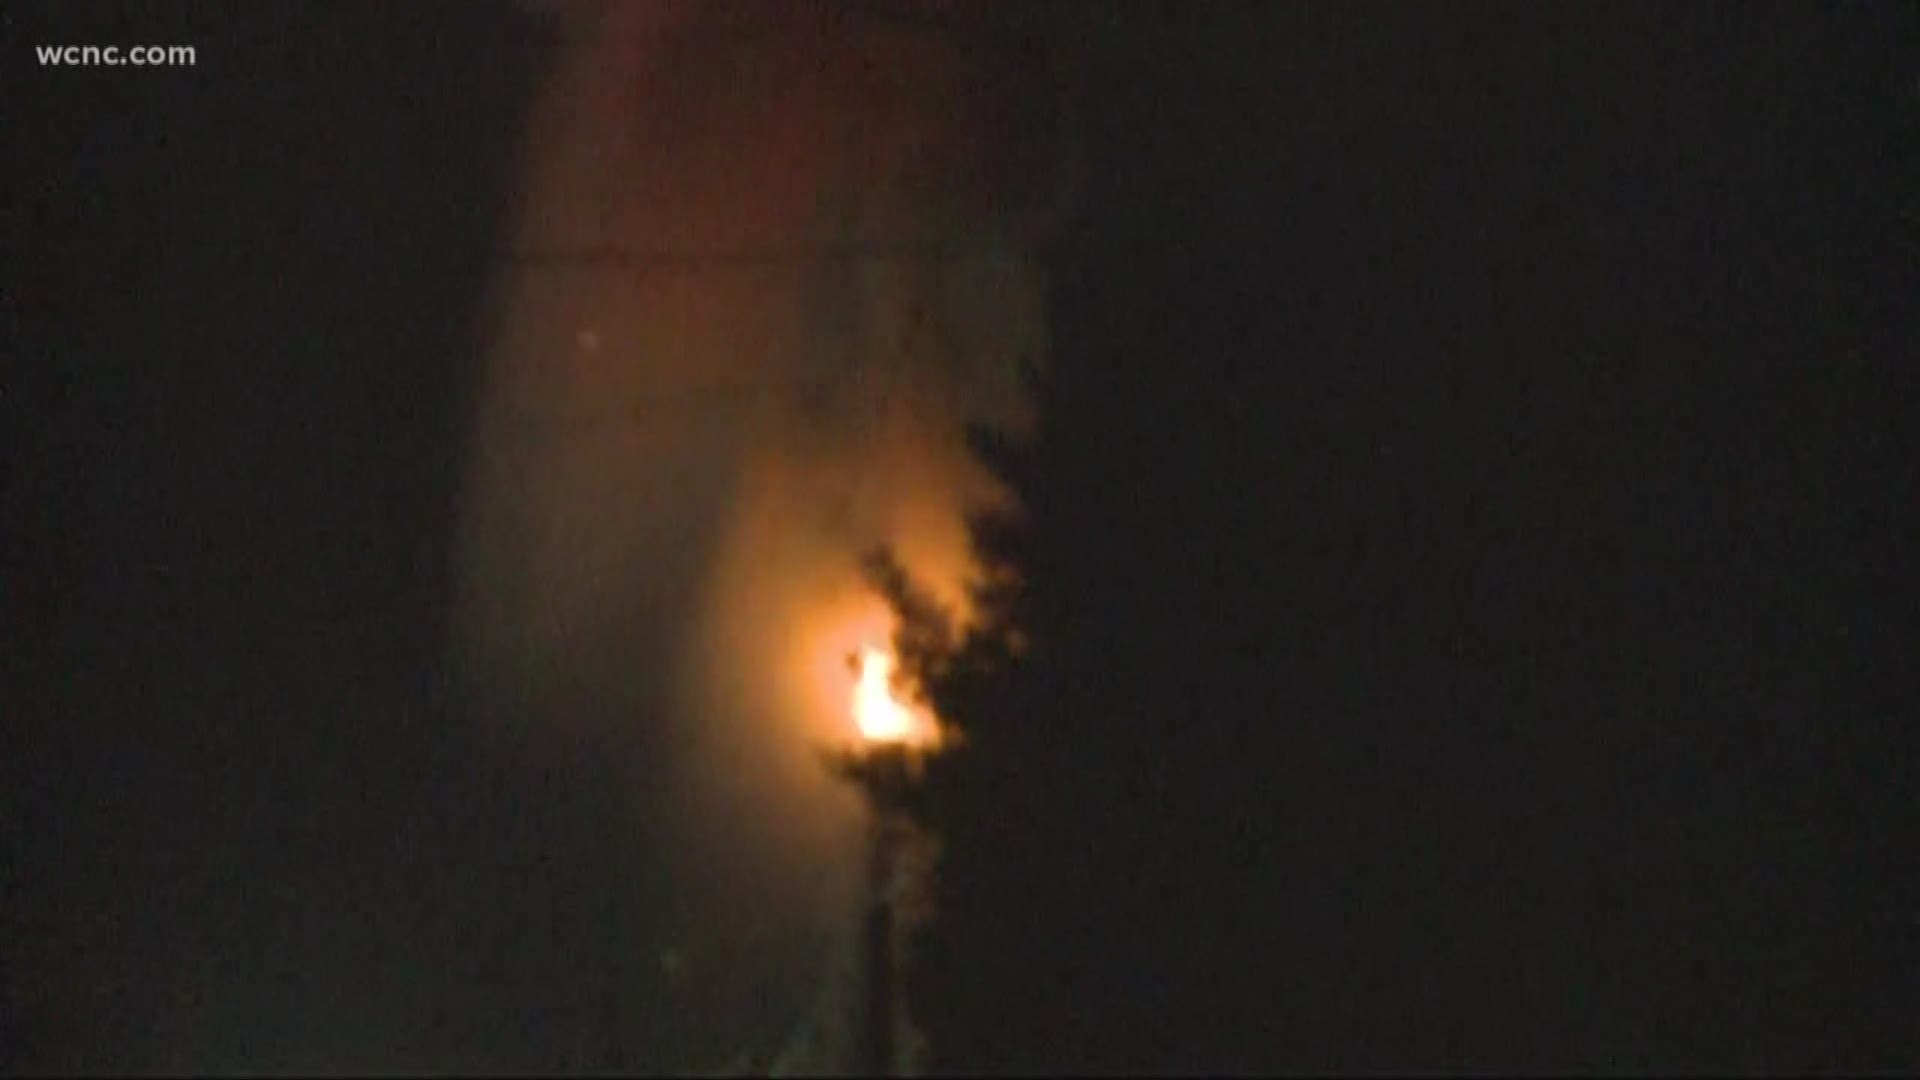 A transformer explosion could make matters worse for hundreds of people without electricity in southeast Charlotte.